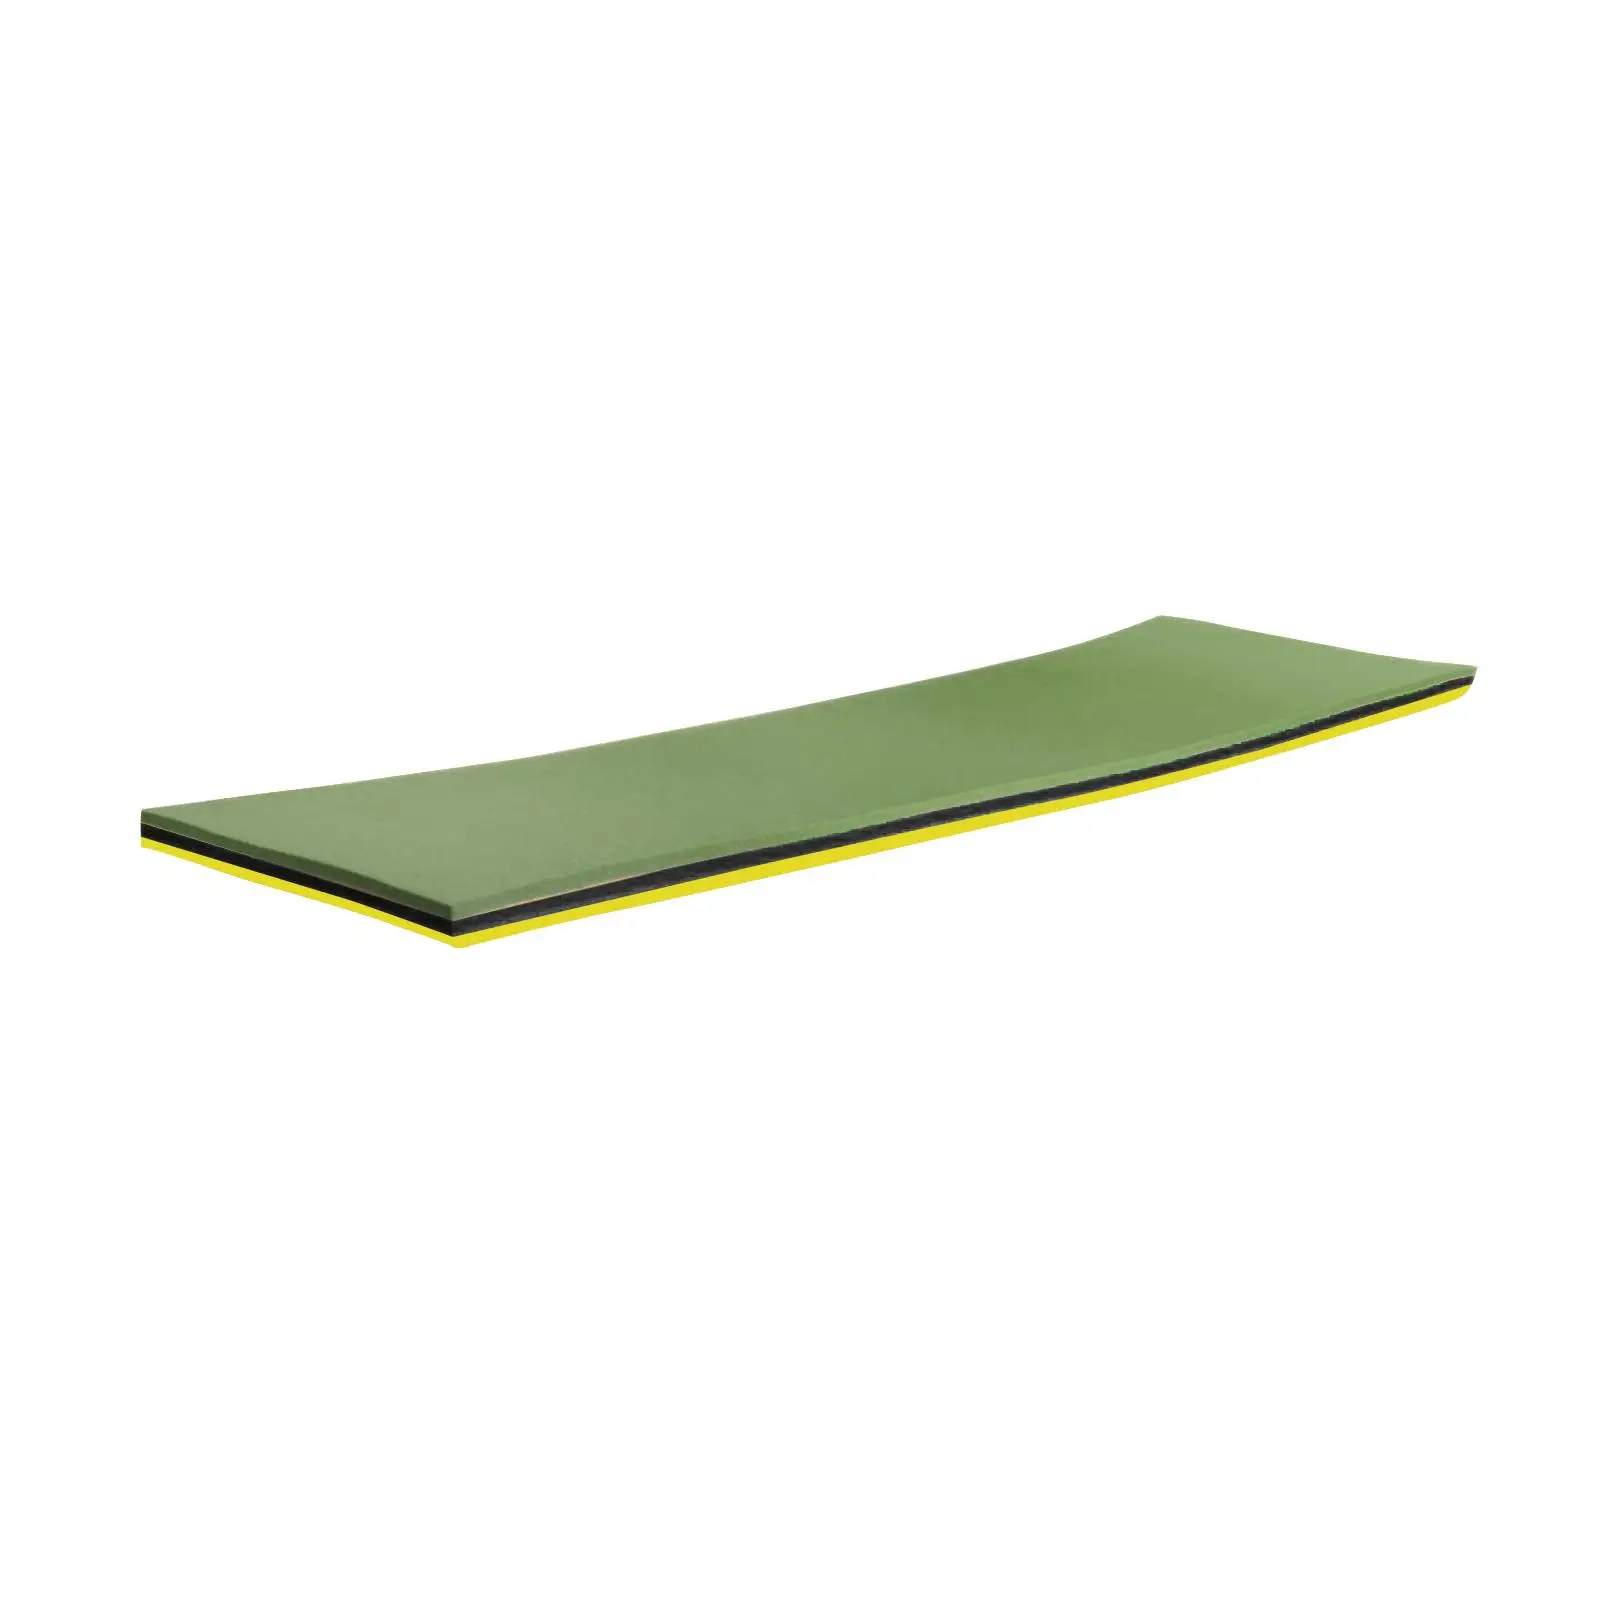 Pool Floating Water Mat Water Raft 110x40x3.2cm Durable Portable for Children and Adults Yellow Black Green Xpe Foam Mat